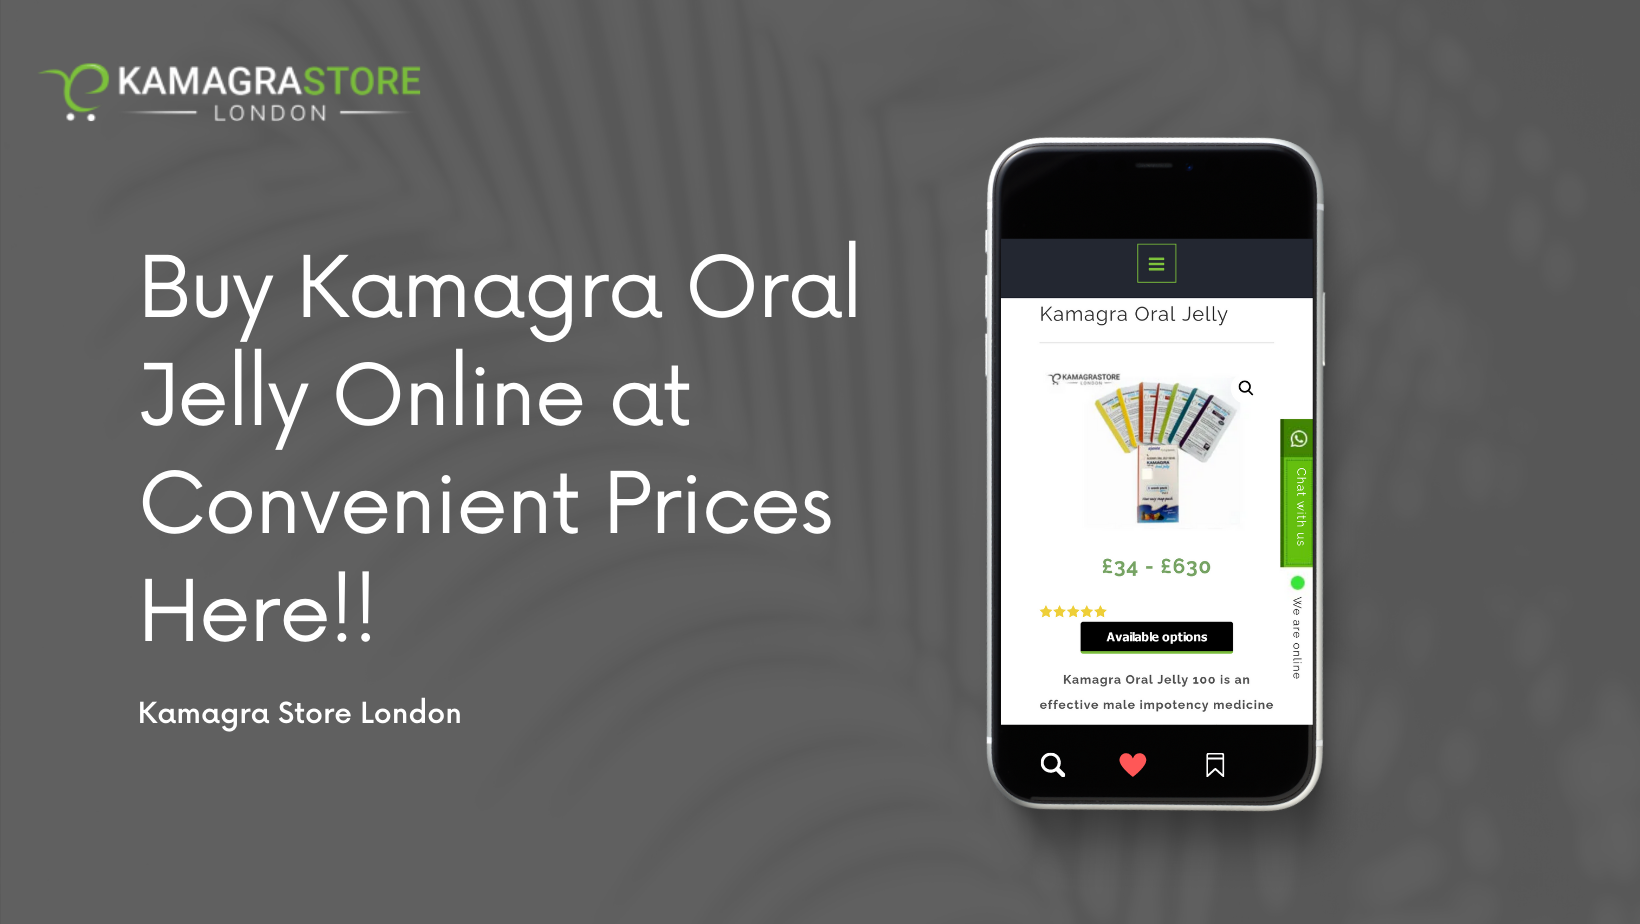 Buy Kamagra Oral Jelly Online at Convenient Prices Here!!